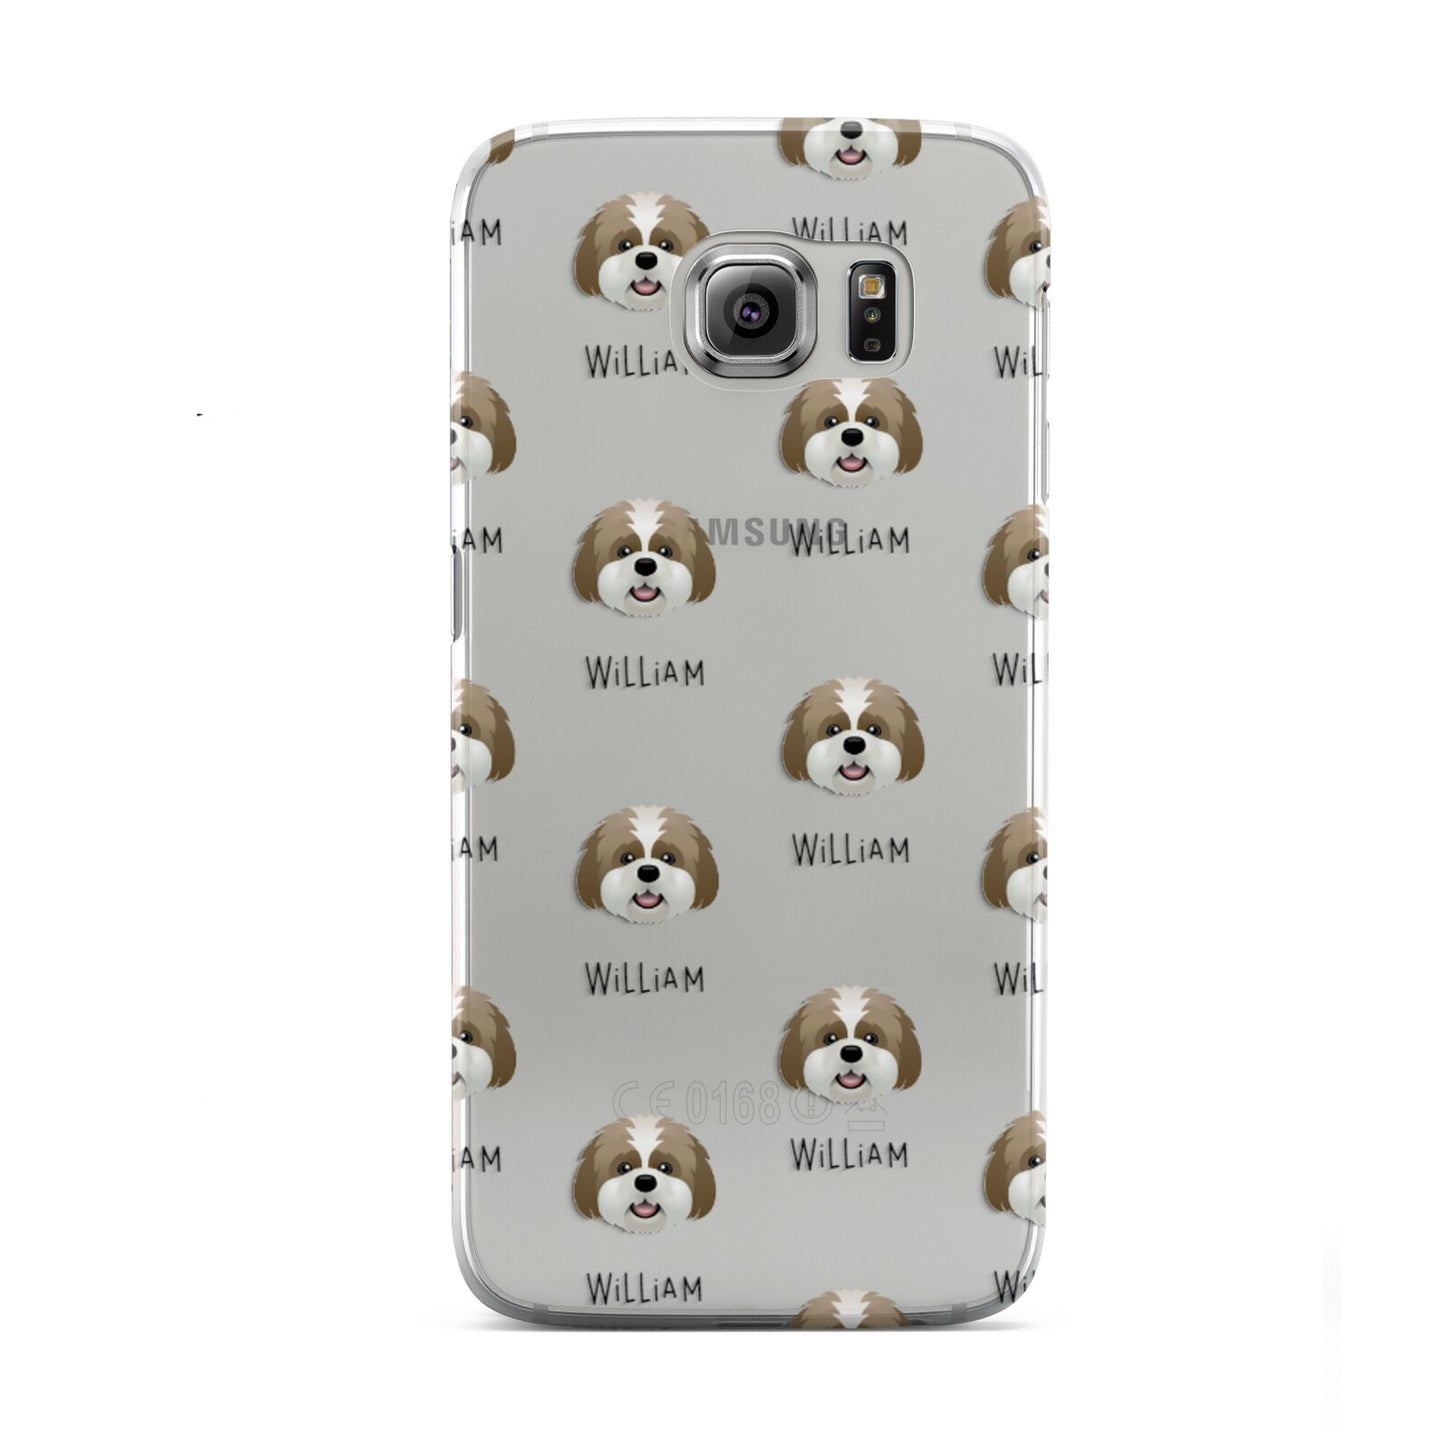 Lhatese Icon with Name Samsung Galaxy S6 Case